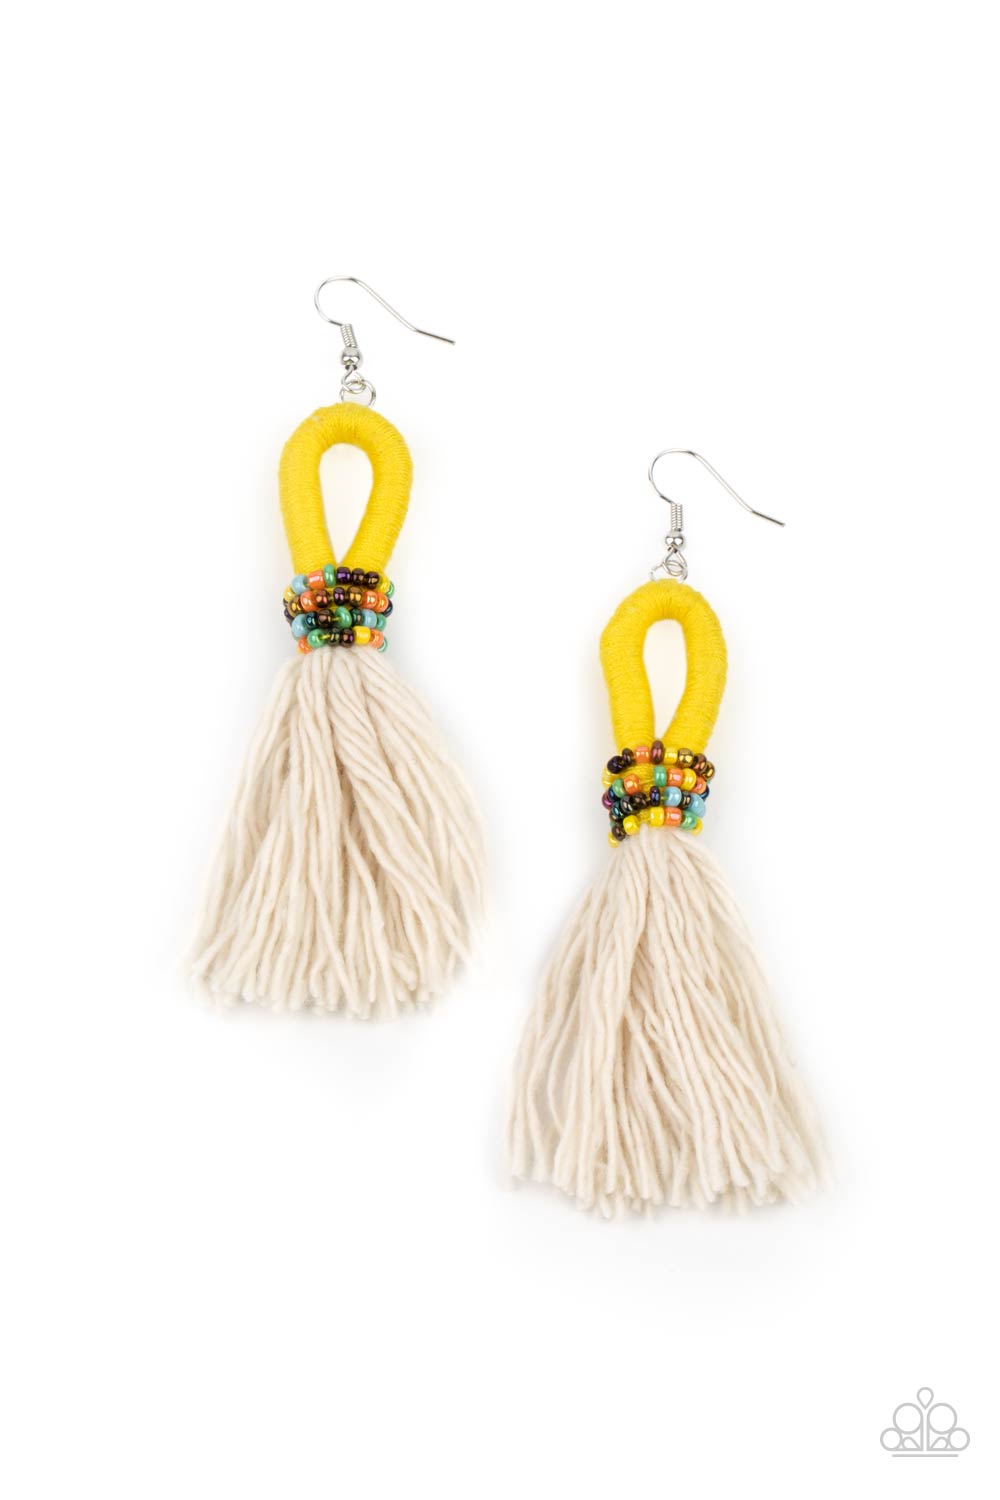 A tassel of soft white cotton fans out under rows of brightly colored seed beads. Anchored by a loop of vibrant yellow floss, the eye-catching style swings from the ear for a show-stopping statement. Earring attaches to a standard fishhook fitting.